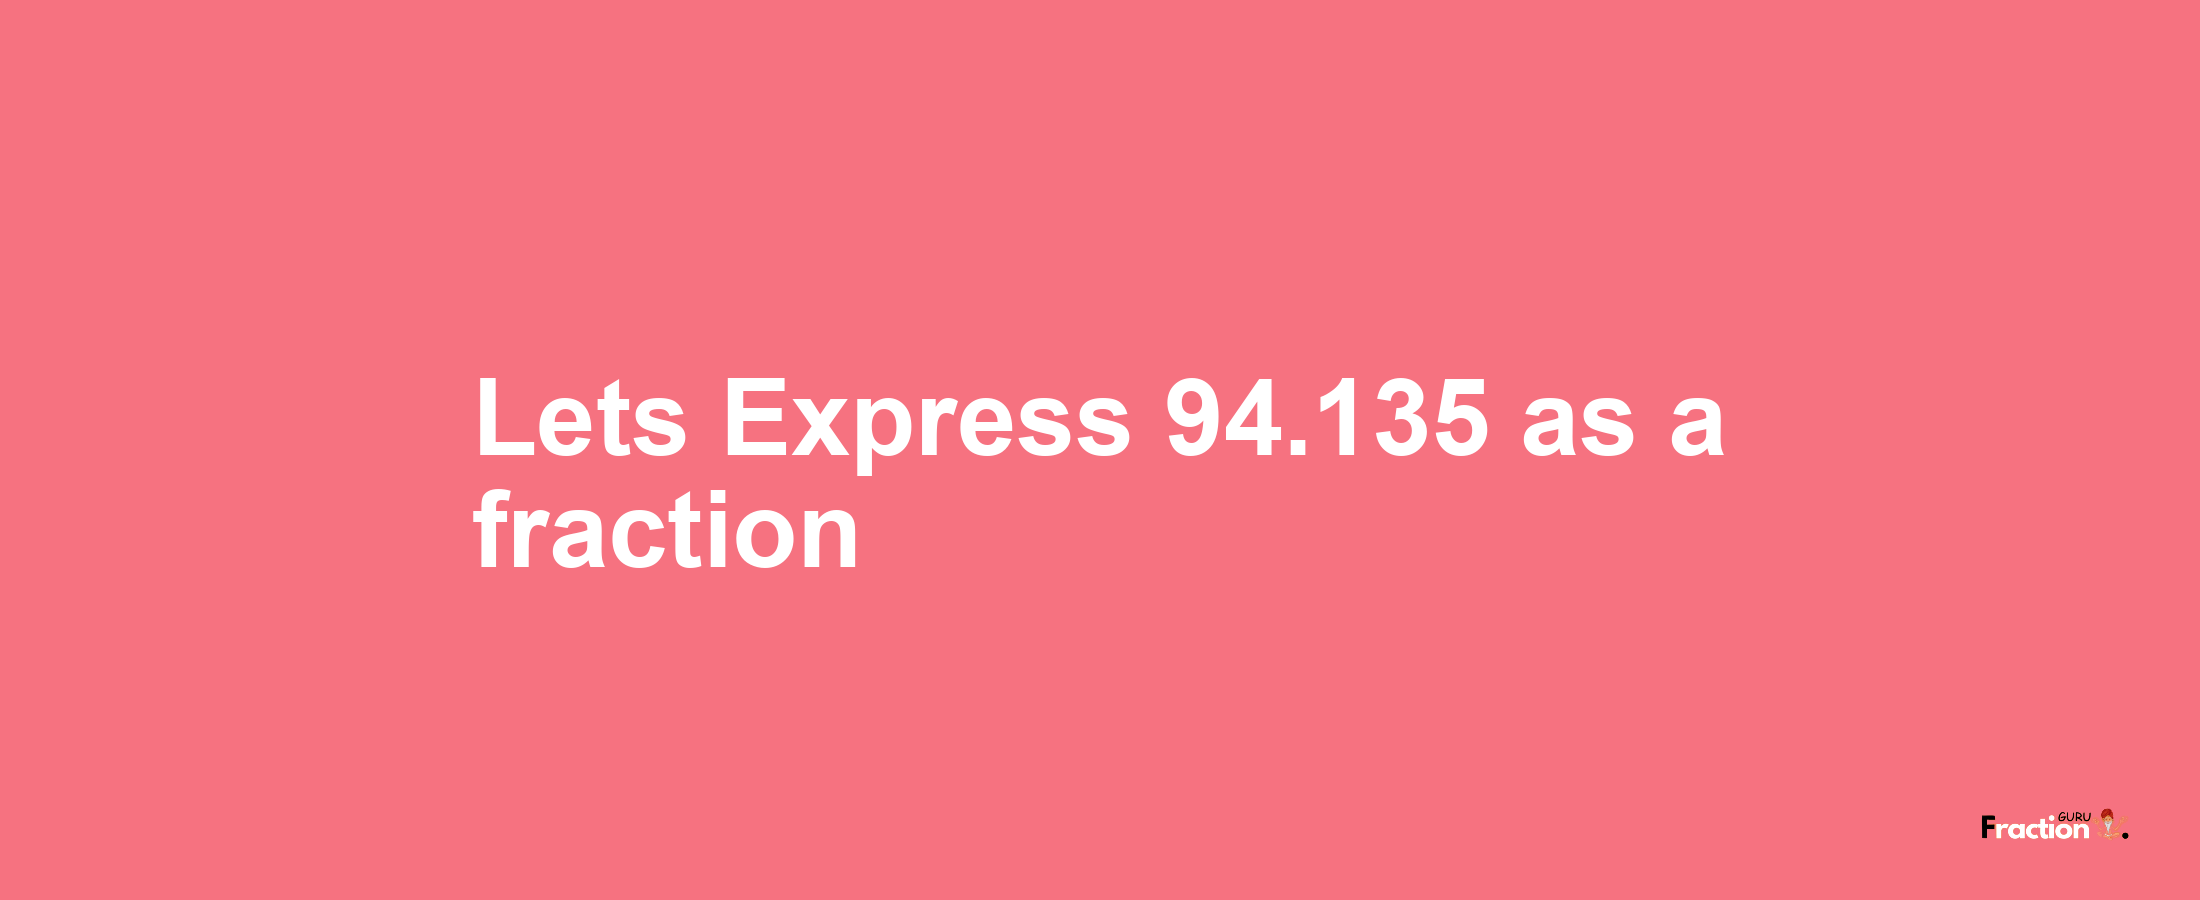 Lets Express 94.135 as afraction